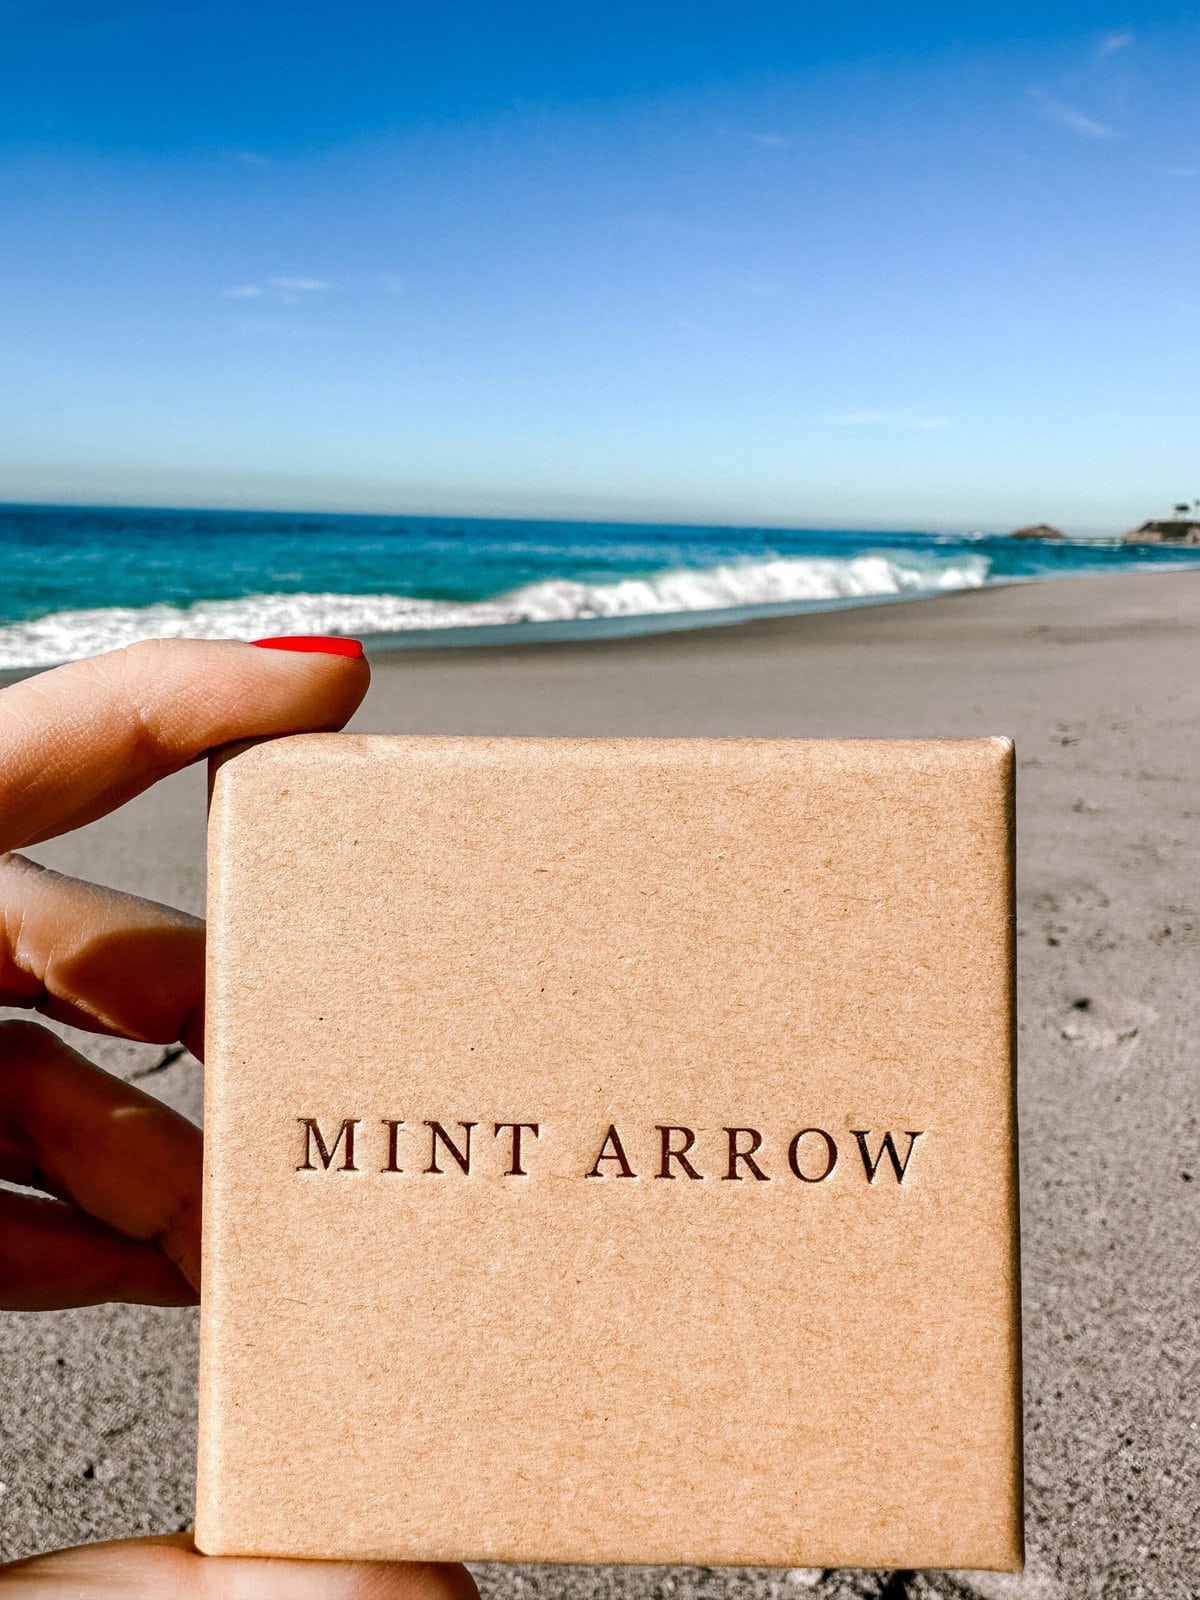 FREE SHIPPING on Mint Arrow Messages merch - gifts just in time